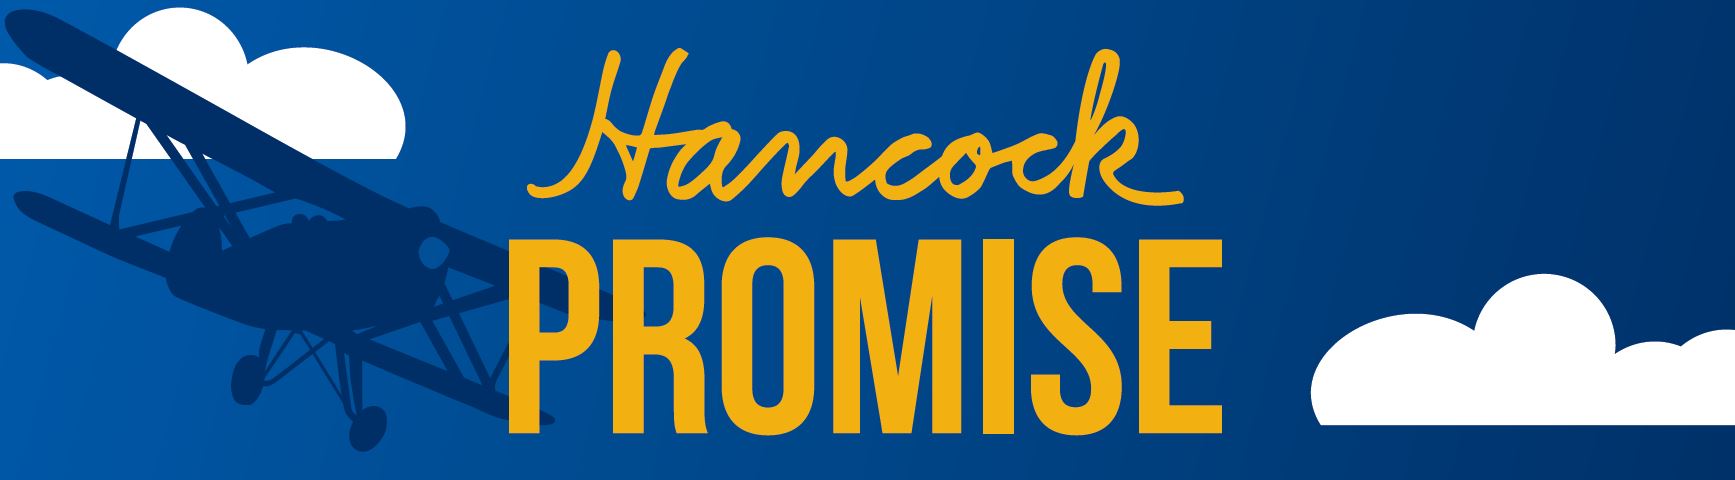 Students and parents to learn about The Hancock Promise at information sessions